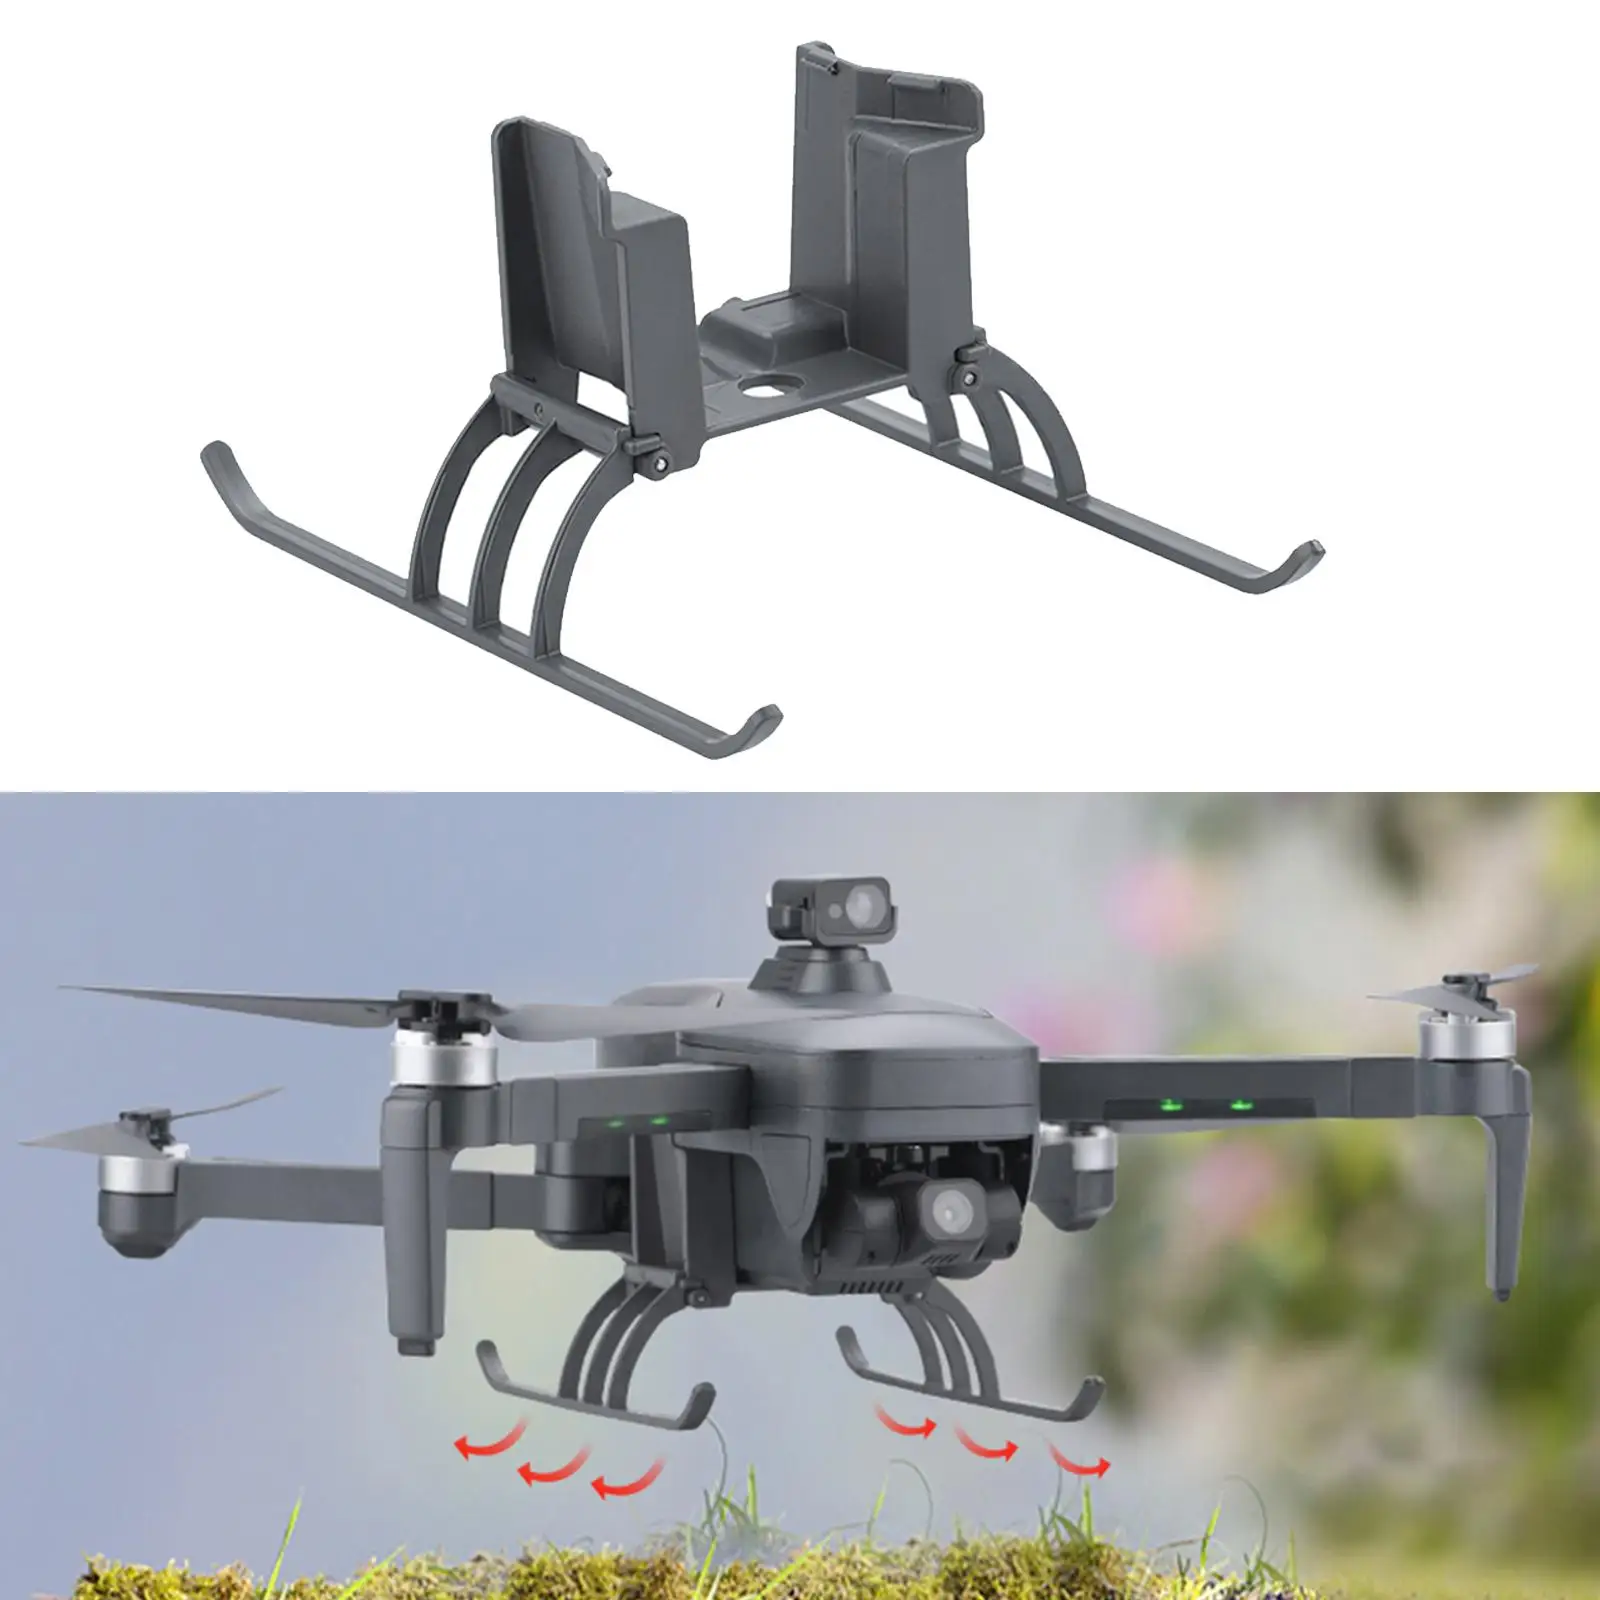 Drone Folding Height Extension Landing Feet Gimbal Protector for SG906Max, Light Weight 26.1G Net Weight Durable Accessories